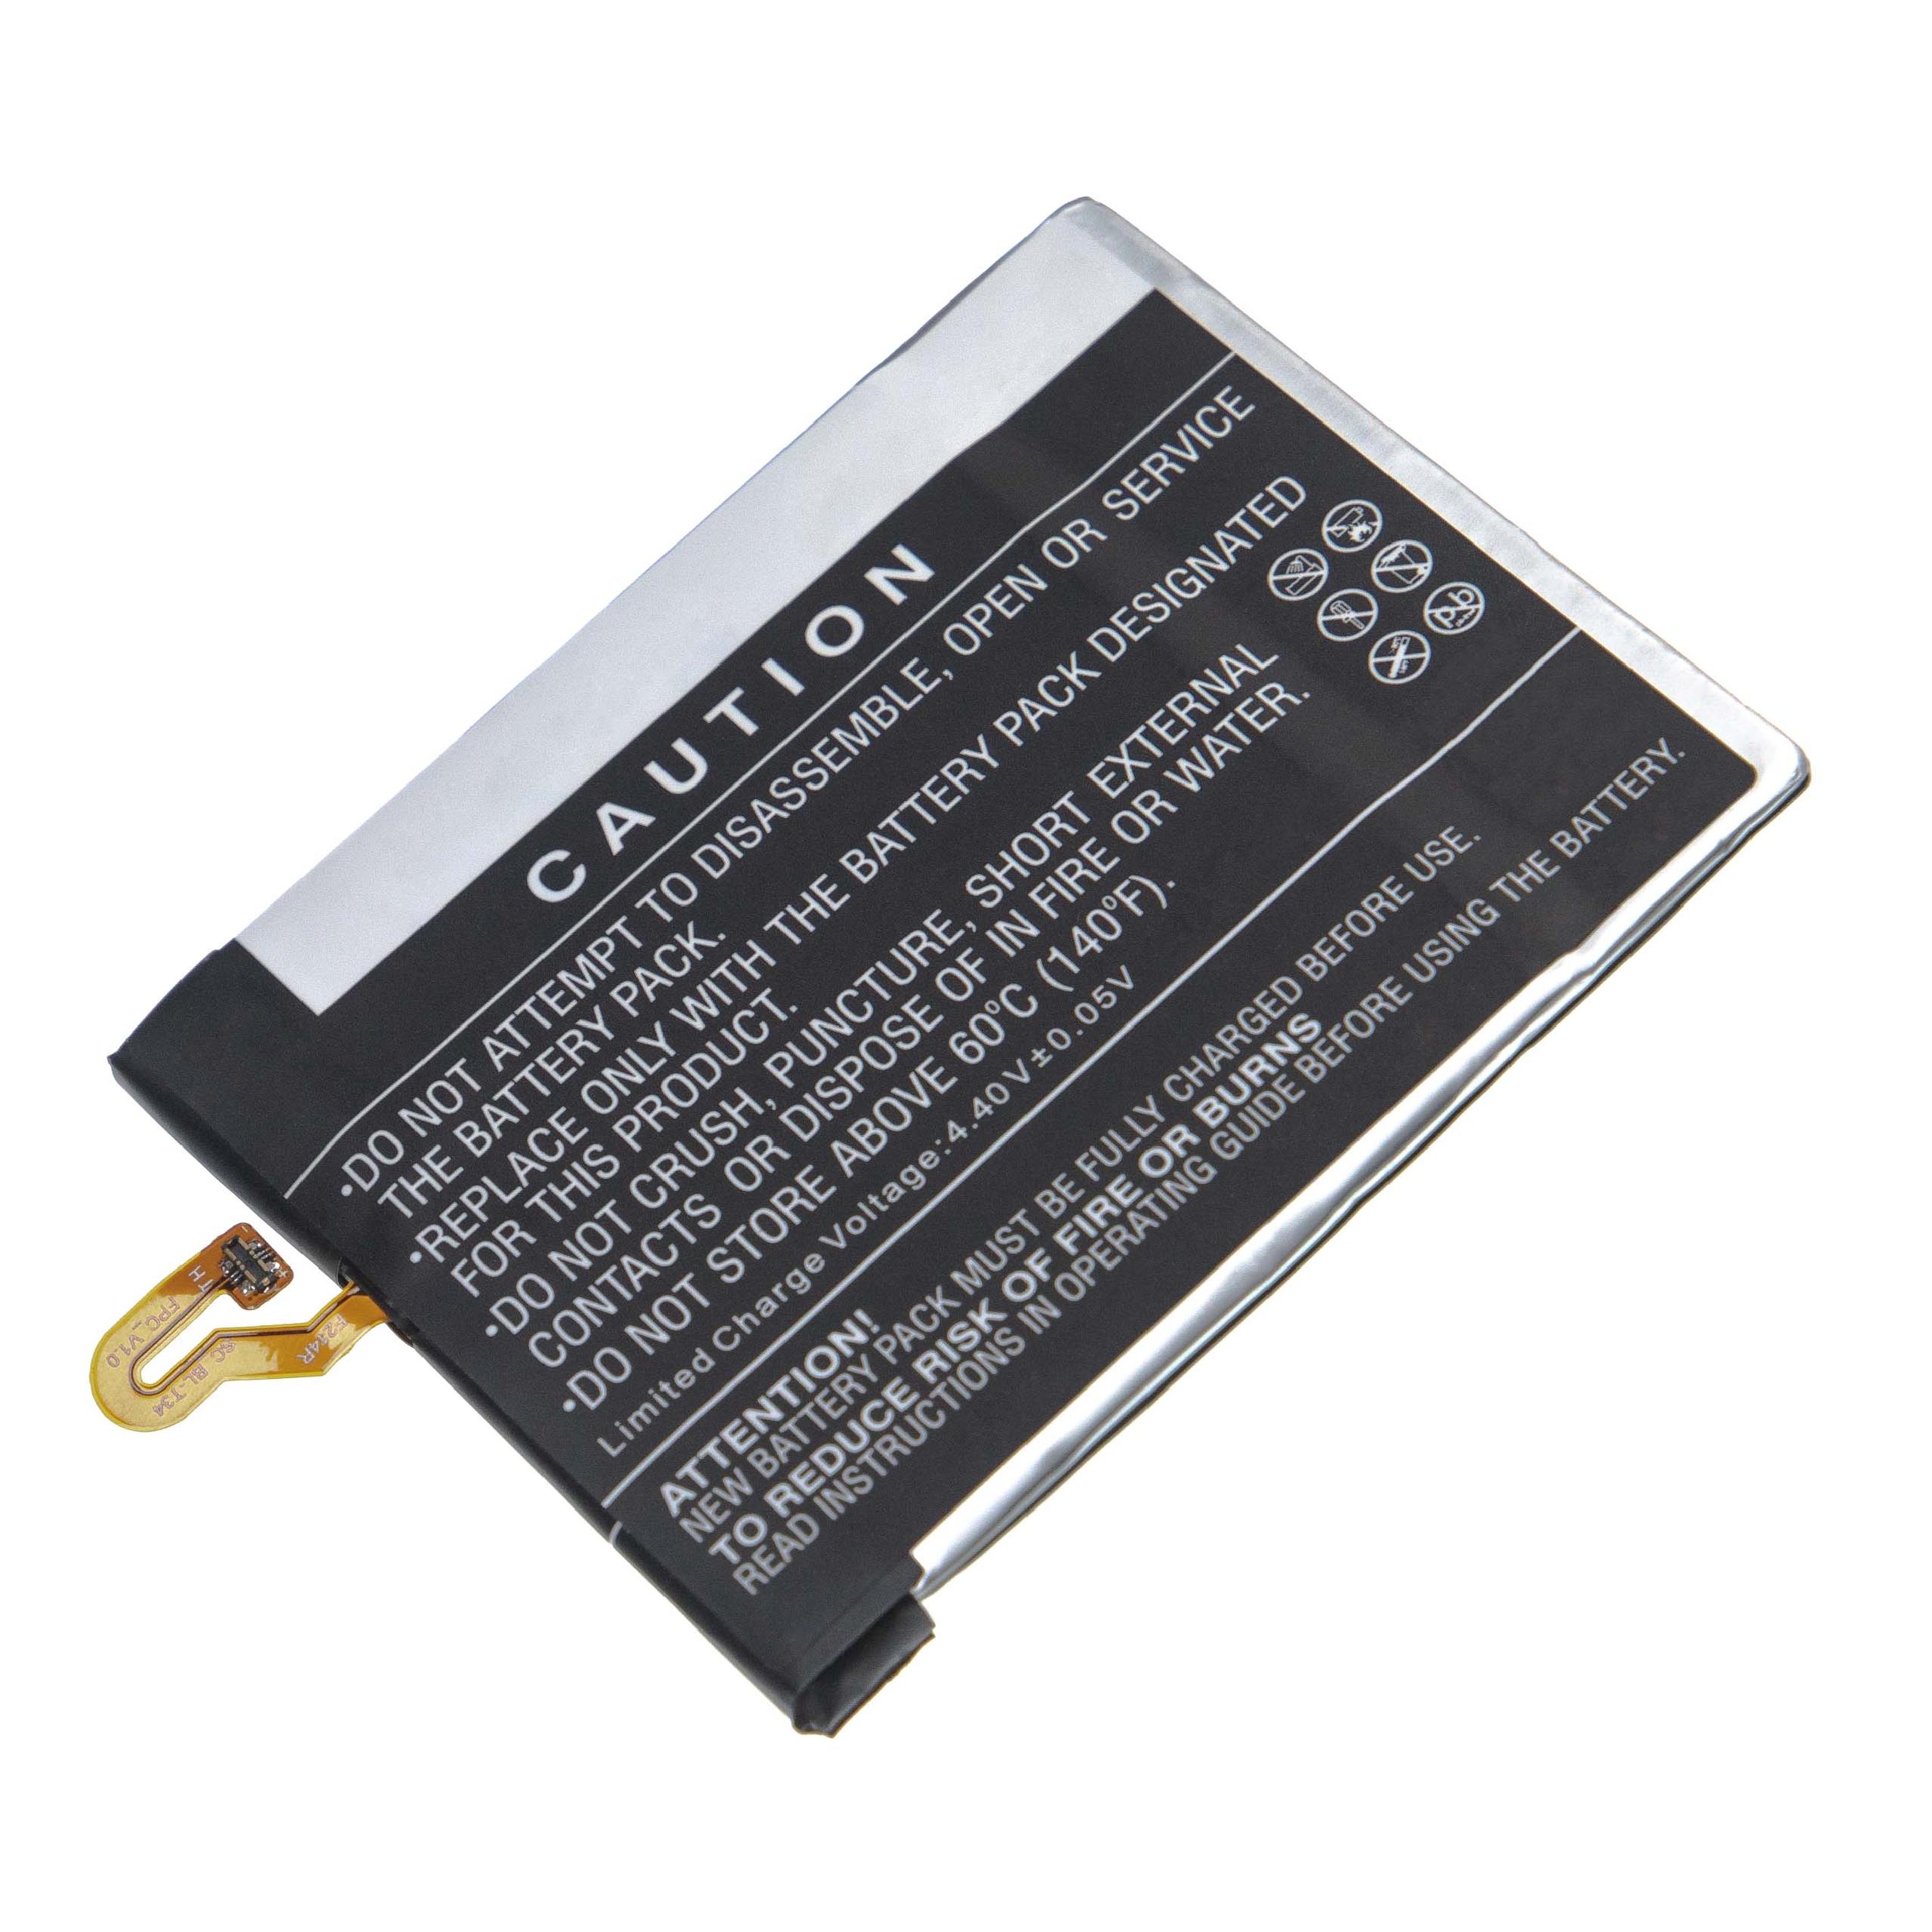 Mobile Phone Battery Replacement for LG BL-T34, EAC63538921 - 3200mAh 3.85V Li-polymer